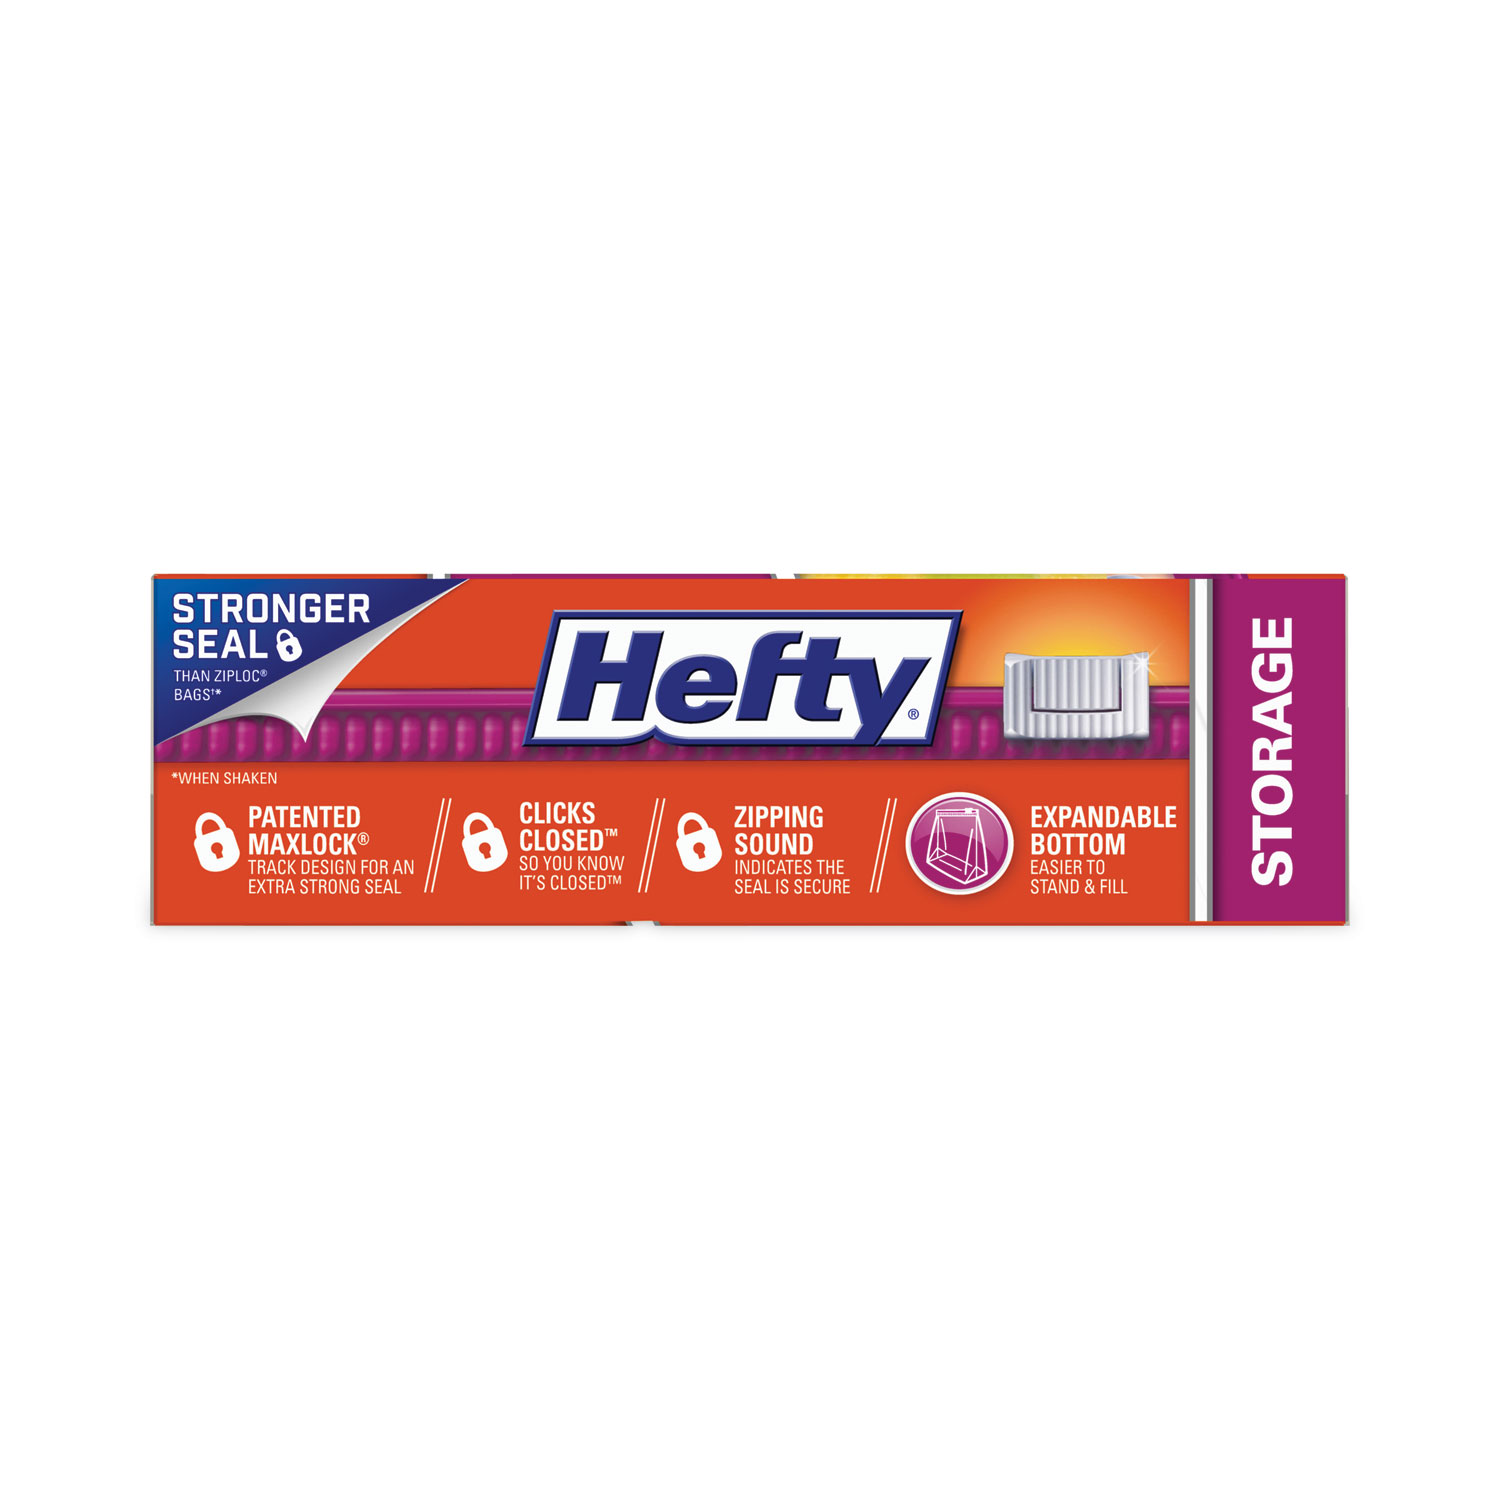 Hefty Slider 2.5 Gallon Jumbo Storage Bags, 12 Count Boxes (Pack of 4)